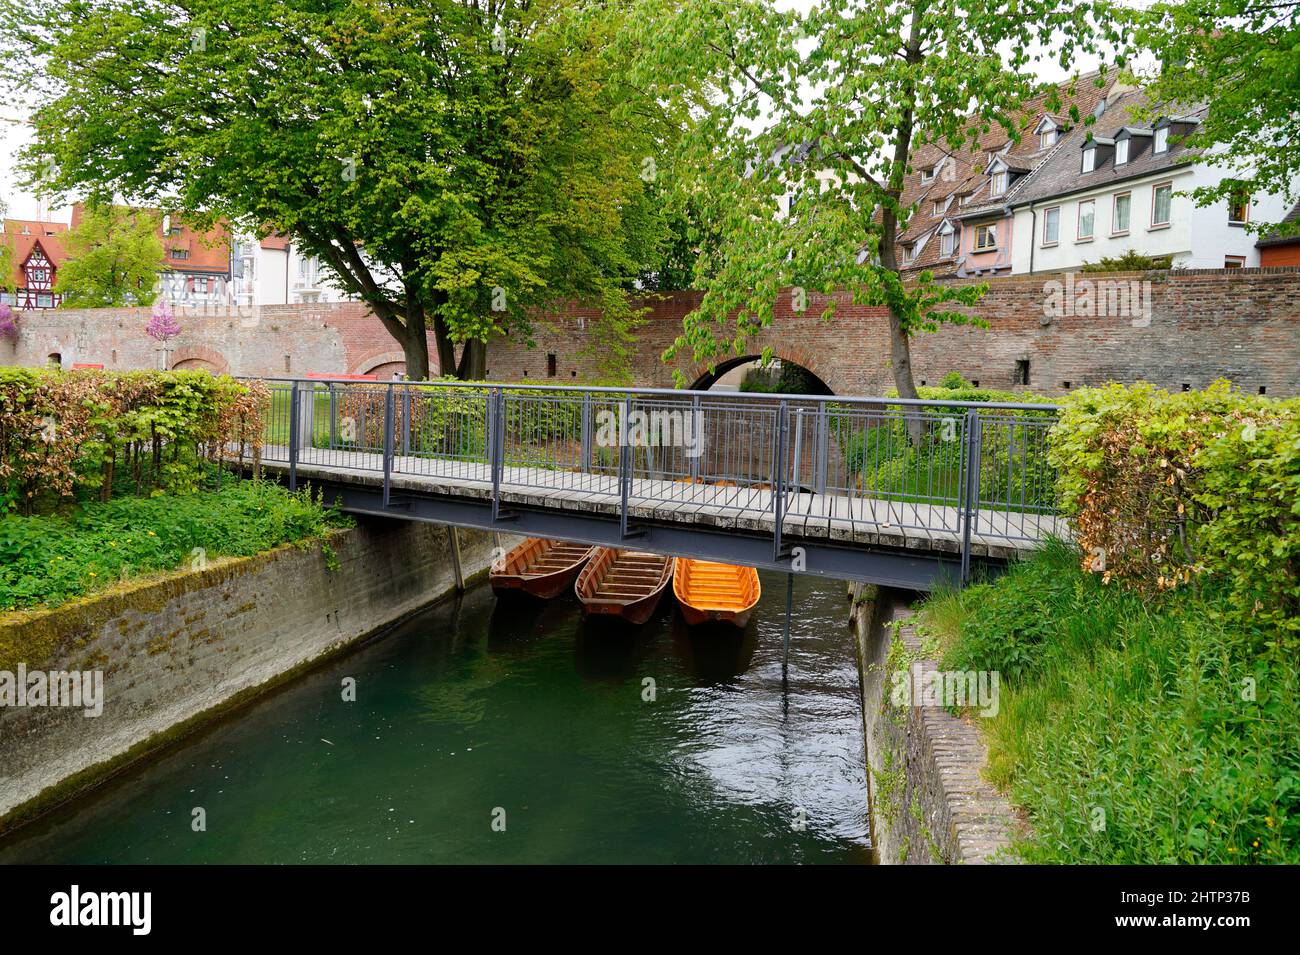 a scenic view of a little bridge, wooden boats (Ulmer Schachteln) underneath it, green trees and the old town wall in the city of Ulm in Germany Stock Photo